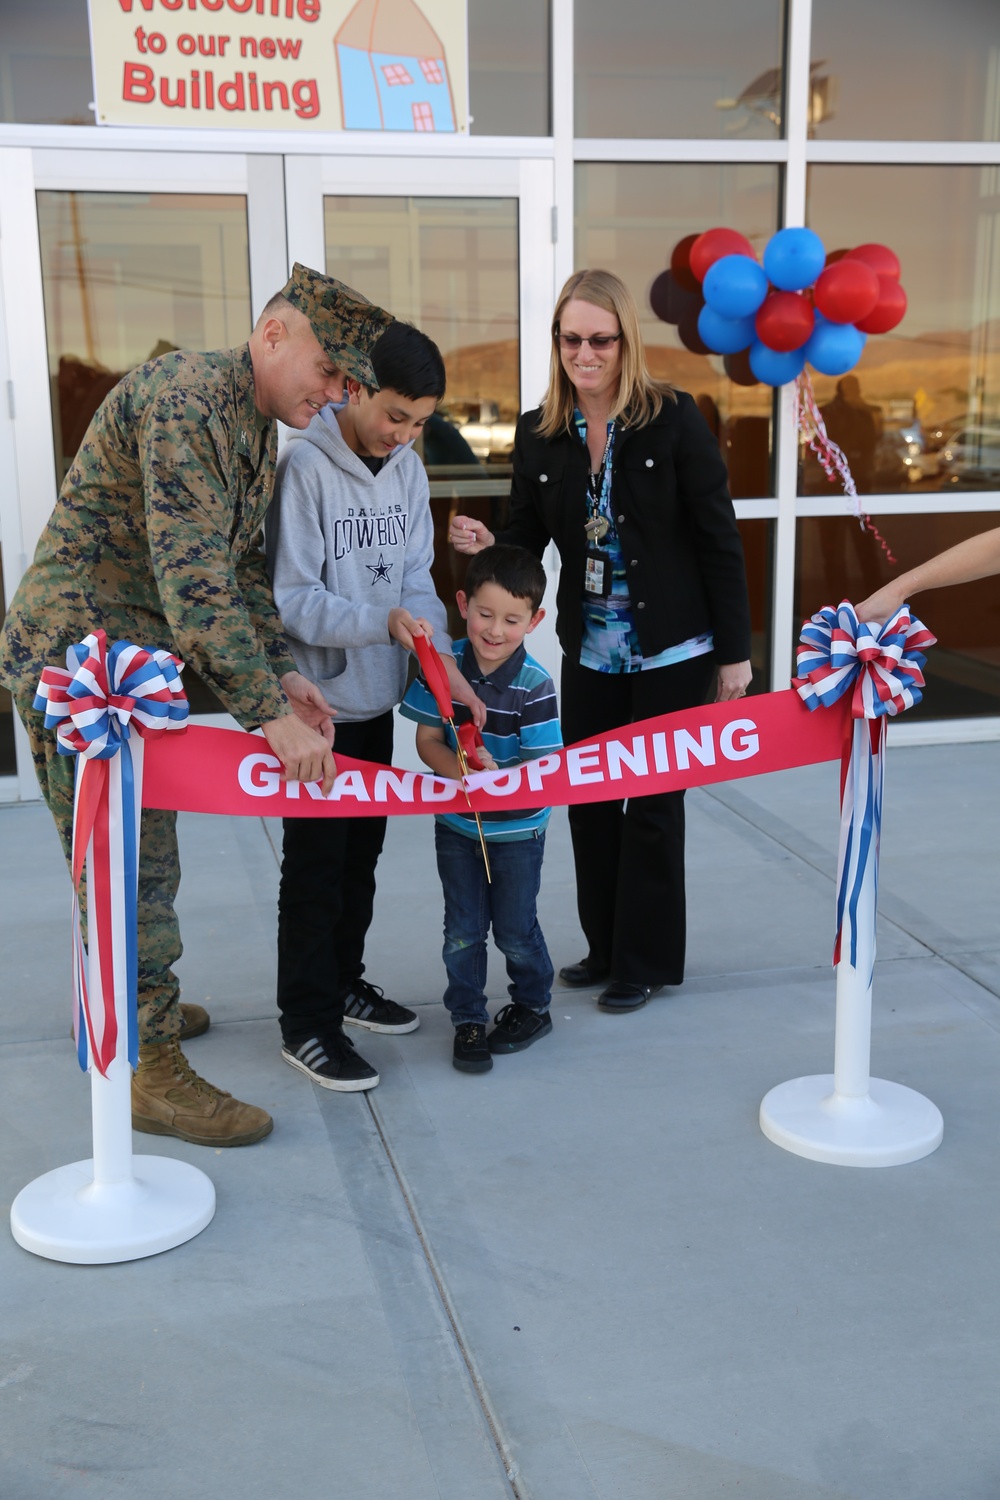 MCLB Barstow’s school-age children in for treat